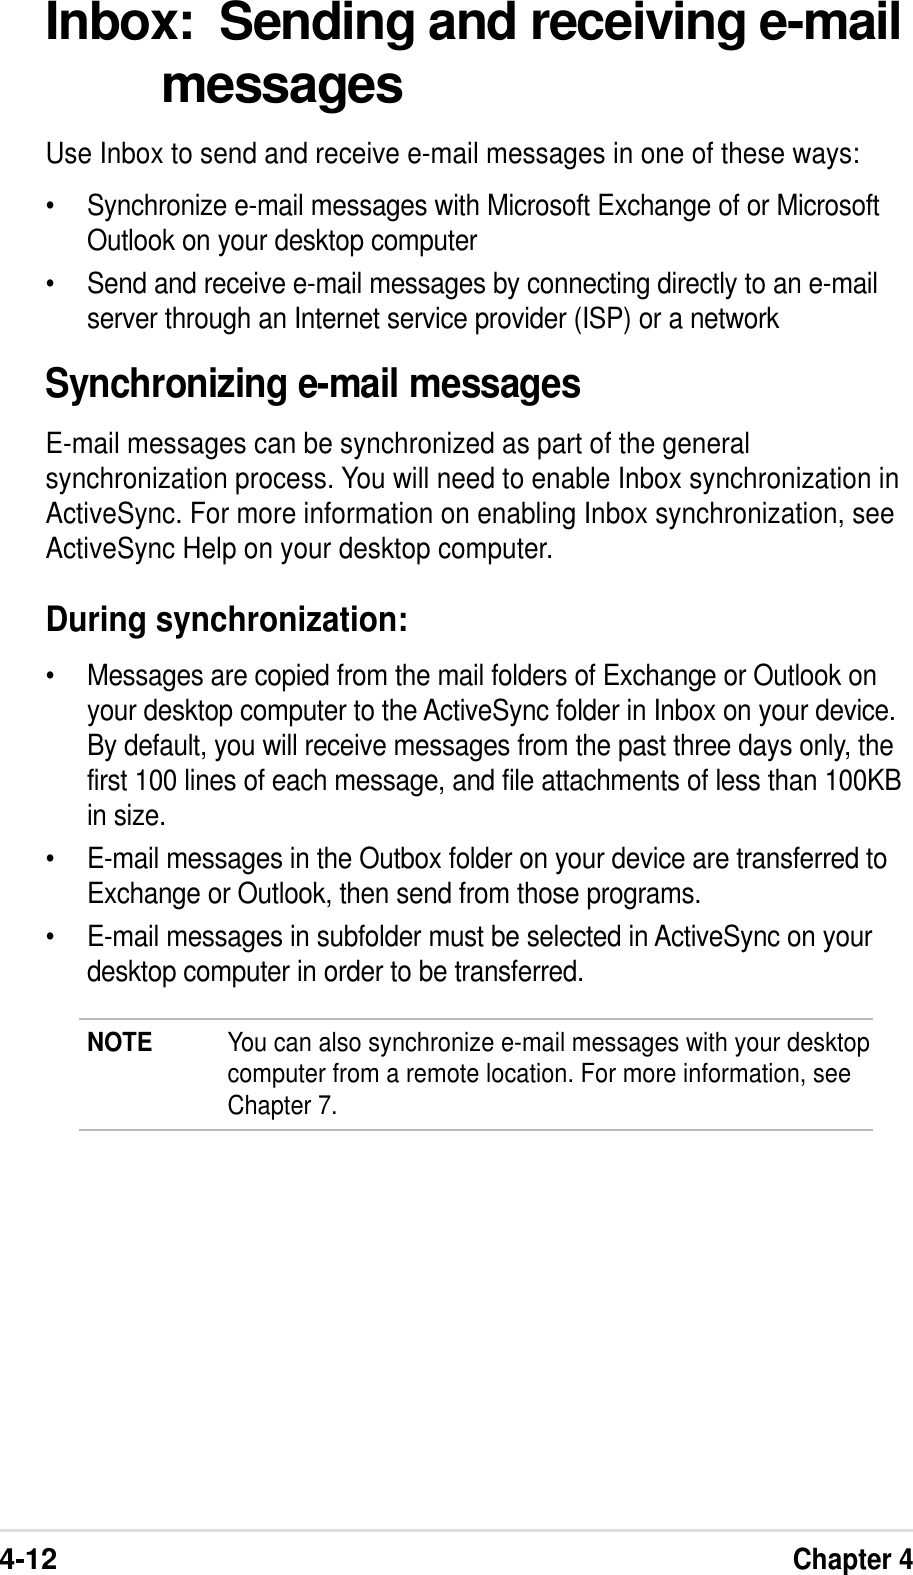 4-12Chapter 4Inbox:  Sending and receiving e-mailmessagesUse Inbox to send and receive e-mail messages in one of these ways:• Synchronize e-mail messages with Microsoft Exchange of or MicrosoftOutlook on your desktop computer• Send and receive e-mail messages by connecting directly to an e-mailserver through an Internet service provider (ISP) or a networkSynchronizing e-mail messagesE-mail messages can be synchronized as part of the generalsynchronization process. You will need to enable Inbox synchronization inActiveSync. For more information on enabling Inbox synchronization, seeActiveSync Help on your desktop computer.During synchronization:• Messages are copied from the mail folders of Exchange or Outlook onyour desktop computer to the ActiveSync folder in Inbox on your device.By default, you will receive messages from the past three days only, thefirst 100 lines of each message, and file attachments of less than 100KBin size.• E-mail messages in the Outbox folder on your device are transferred toExchange or Outlook, then send from those programs.• E-mail messages in subfolder must be selected in ActiveSync on yourdesktop computer in order to be transferred.NOTE You can also synchronize e-mail messages with your desktopcomputer from a remote location. For more information, seeChapter 7.